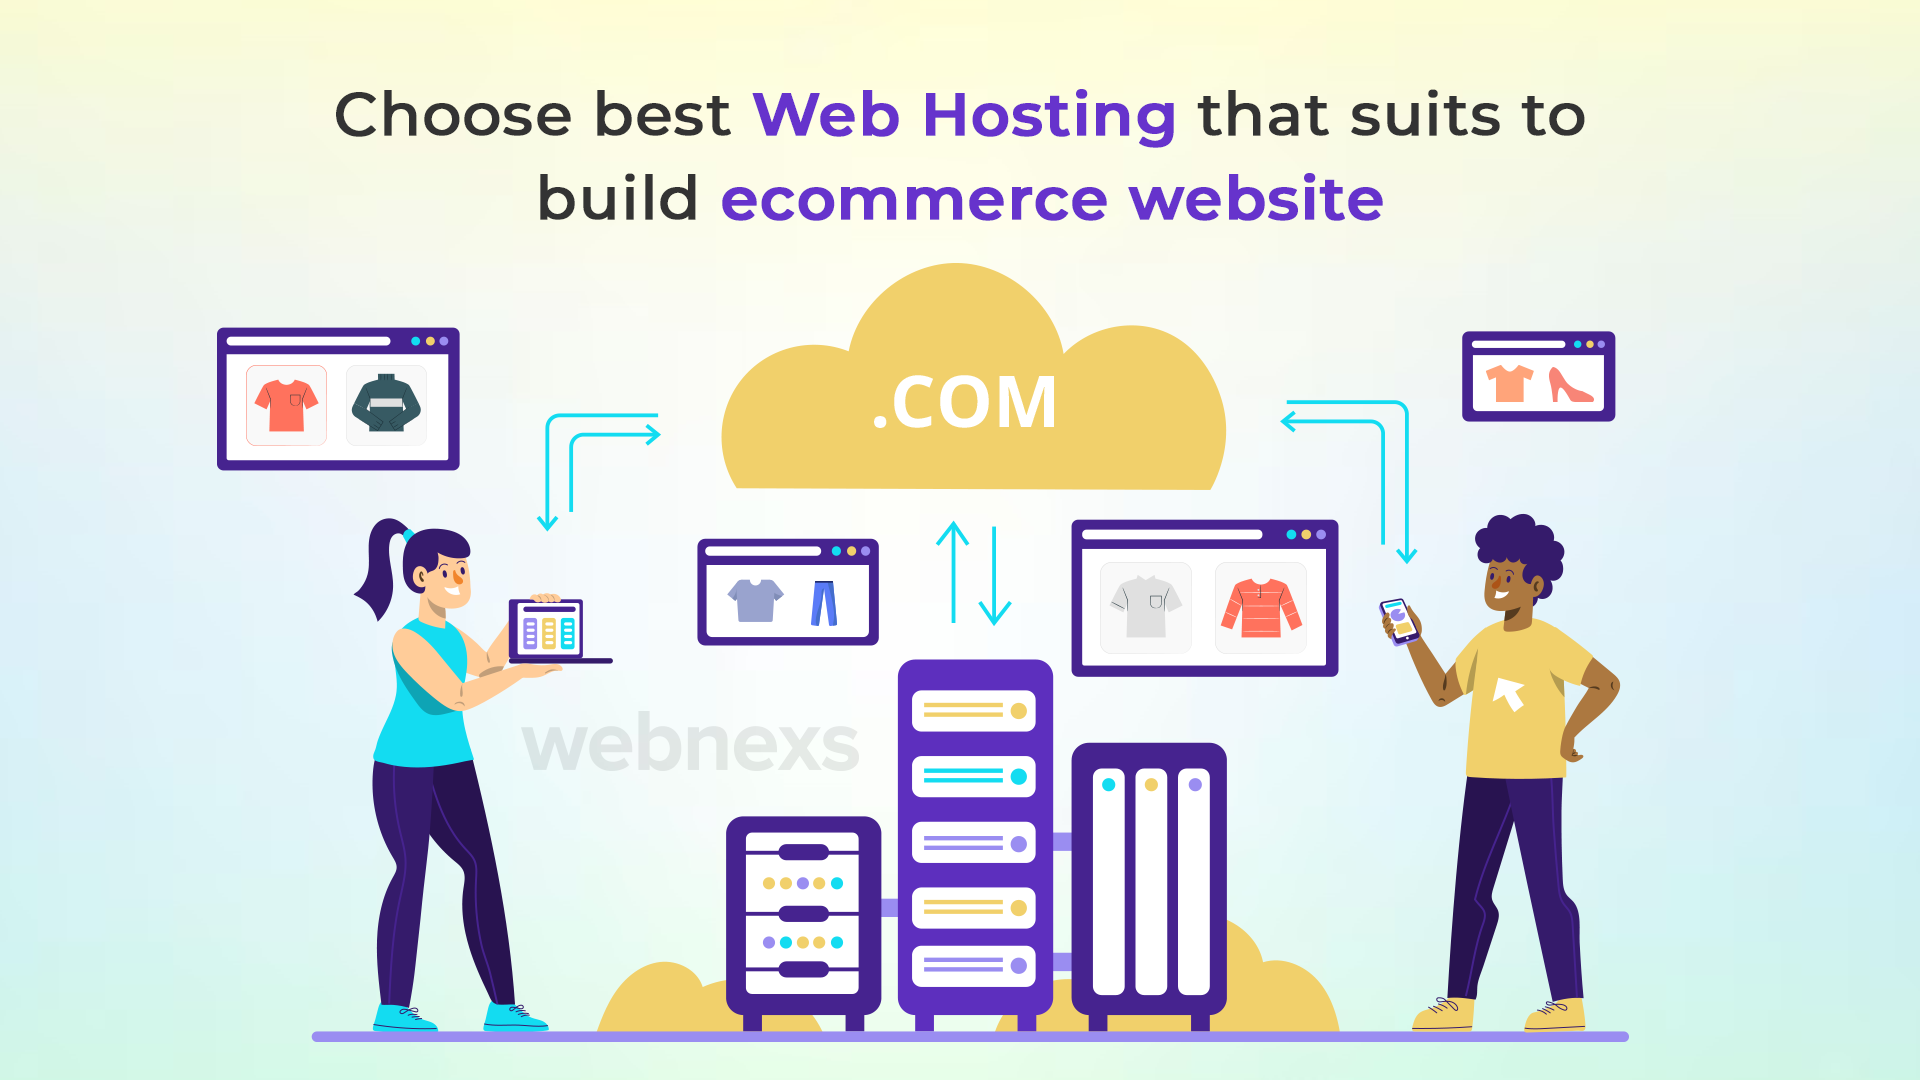 Step 05: Choose best Web Hosting that suits to build ecommerce website